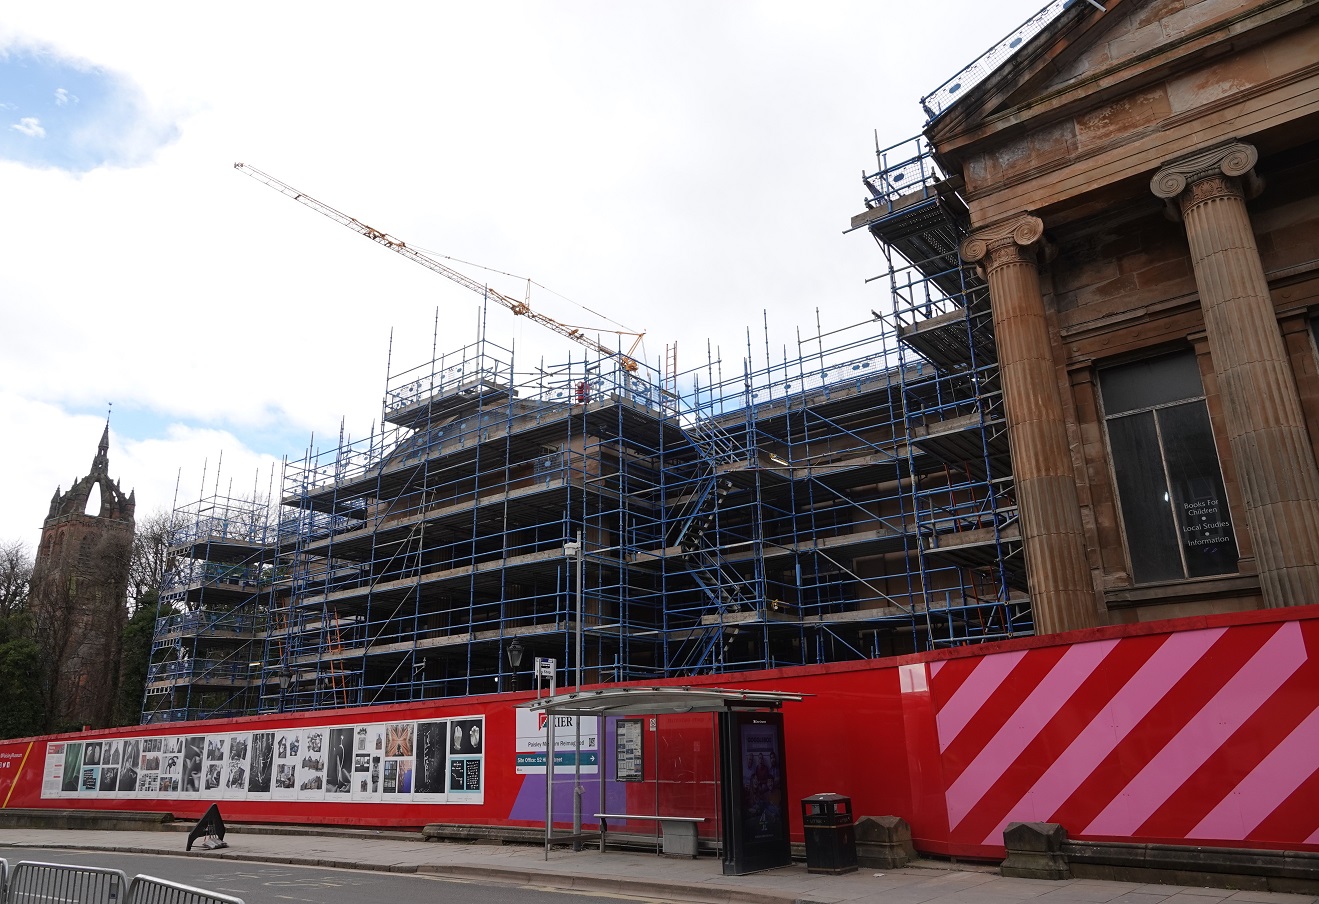 JR scaffolding a new future for Paisley Museum